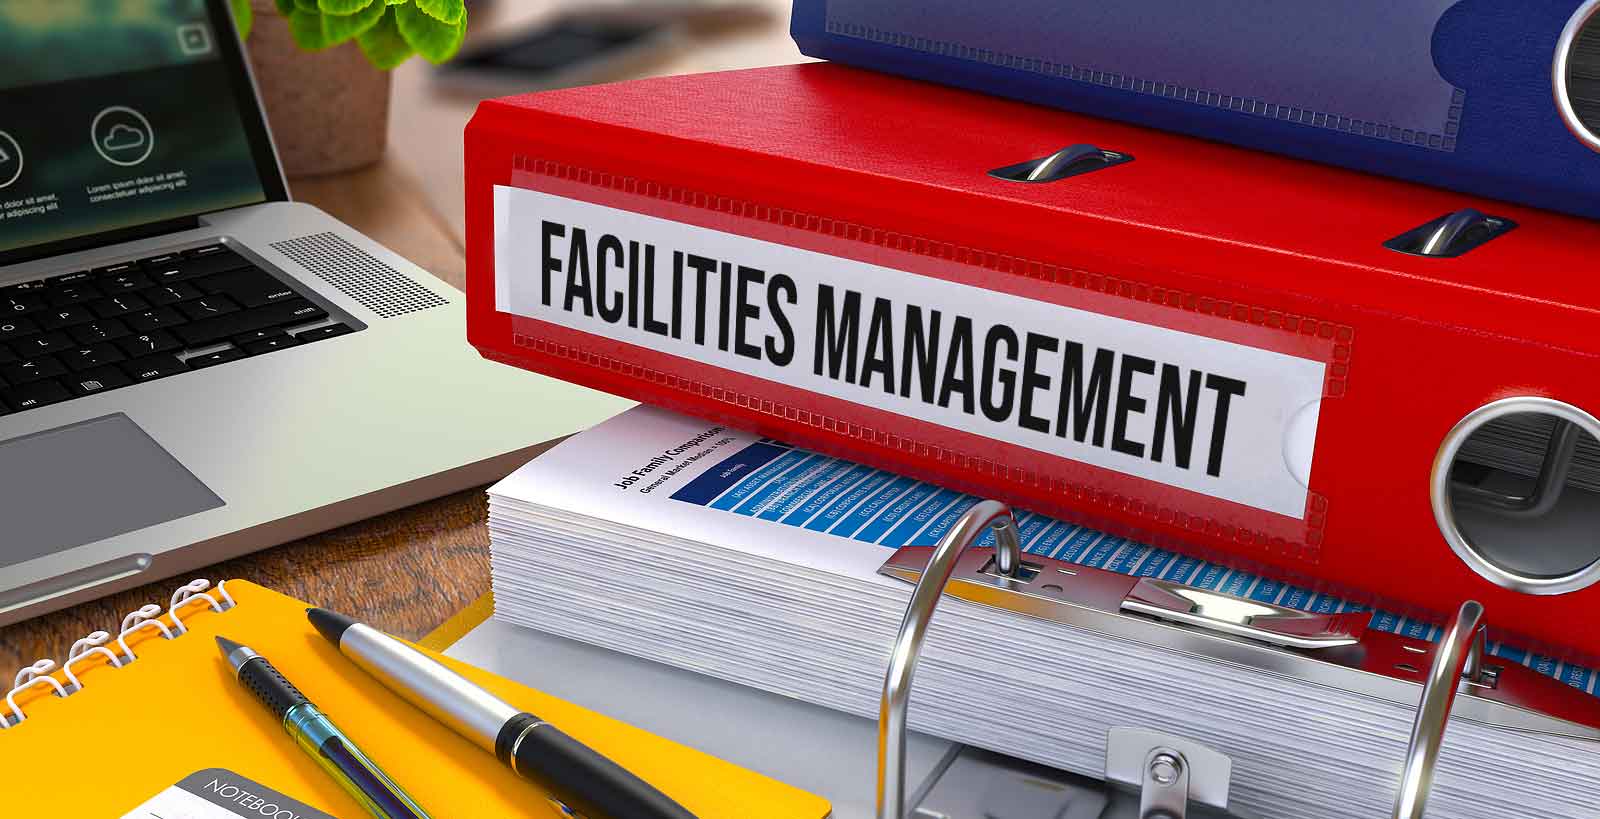 How Asset Management Software helps the School Facilities Manager